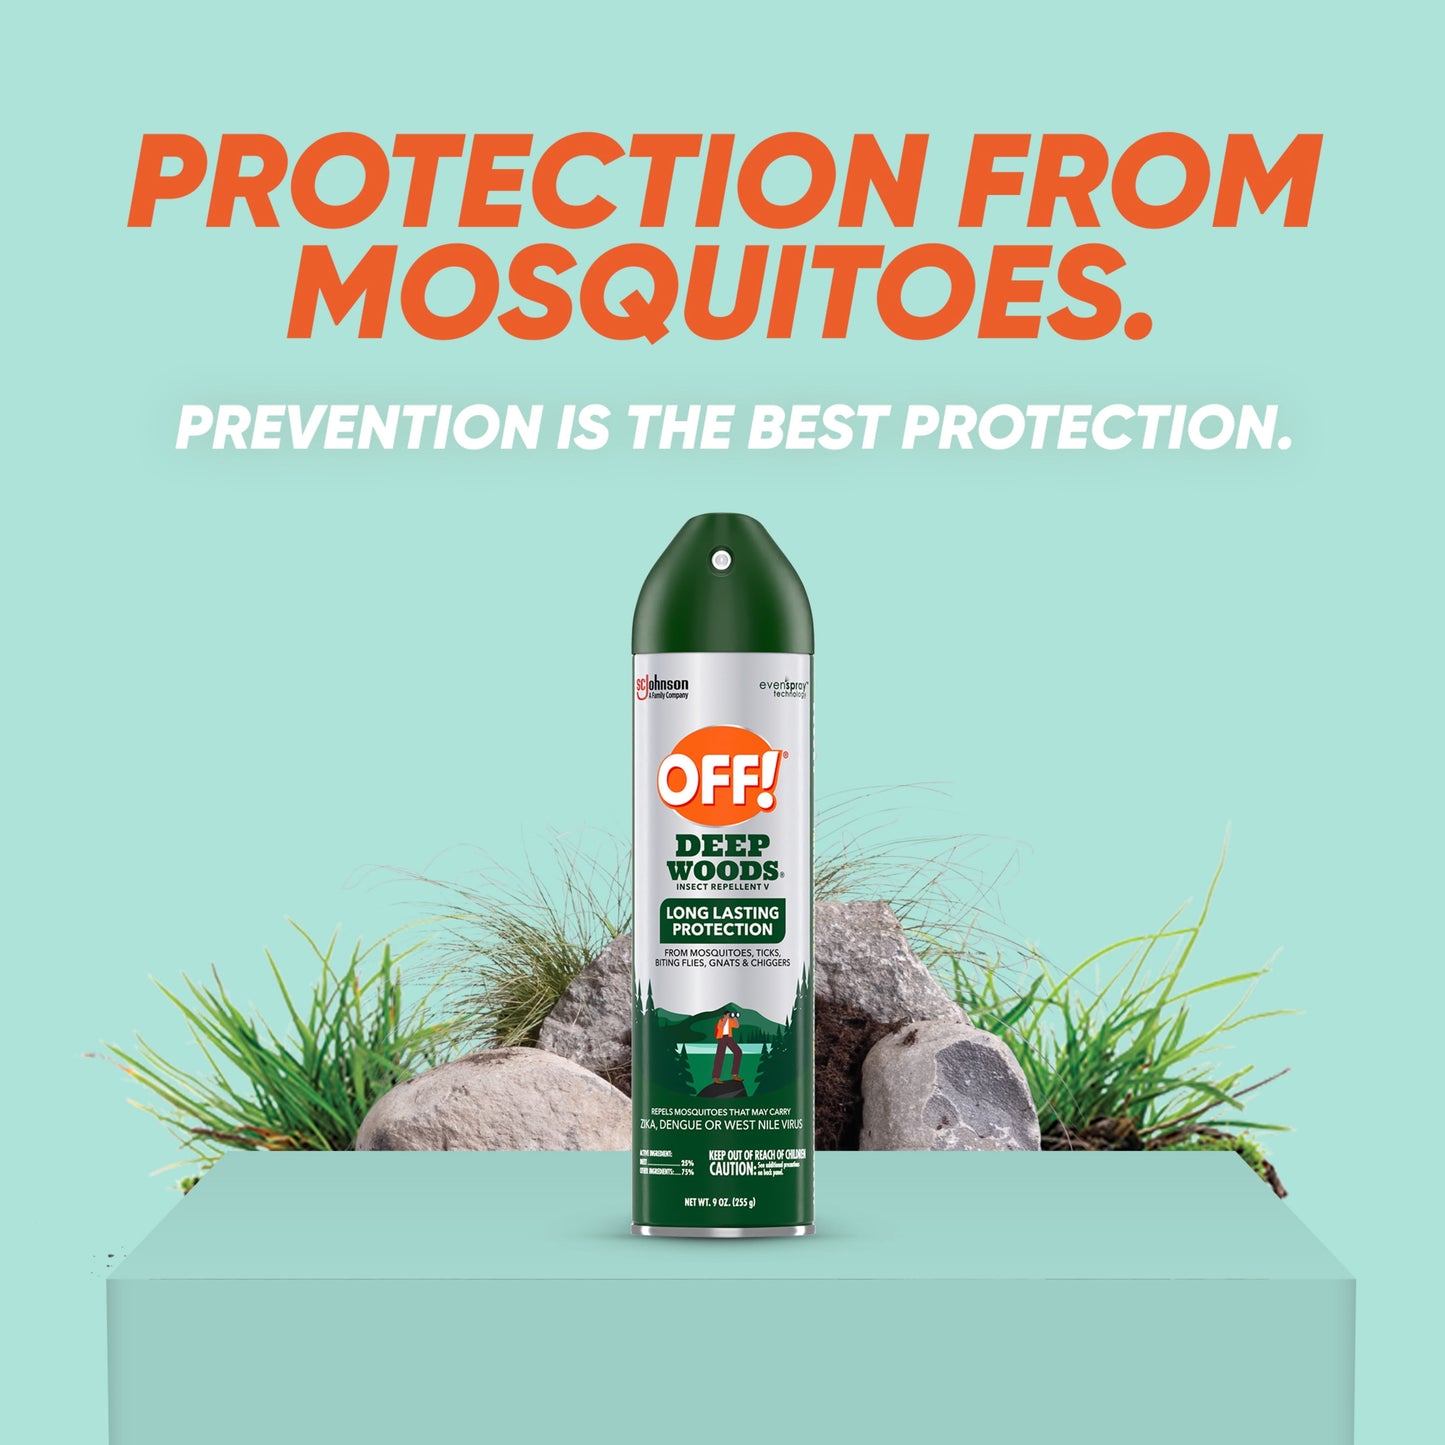 OFF! Deep Woods Insect Repellent V, up to 8 Hours of DEET Defense from Mosquitoes, 9 oz